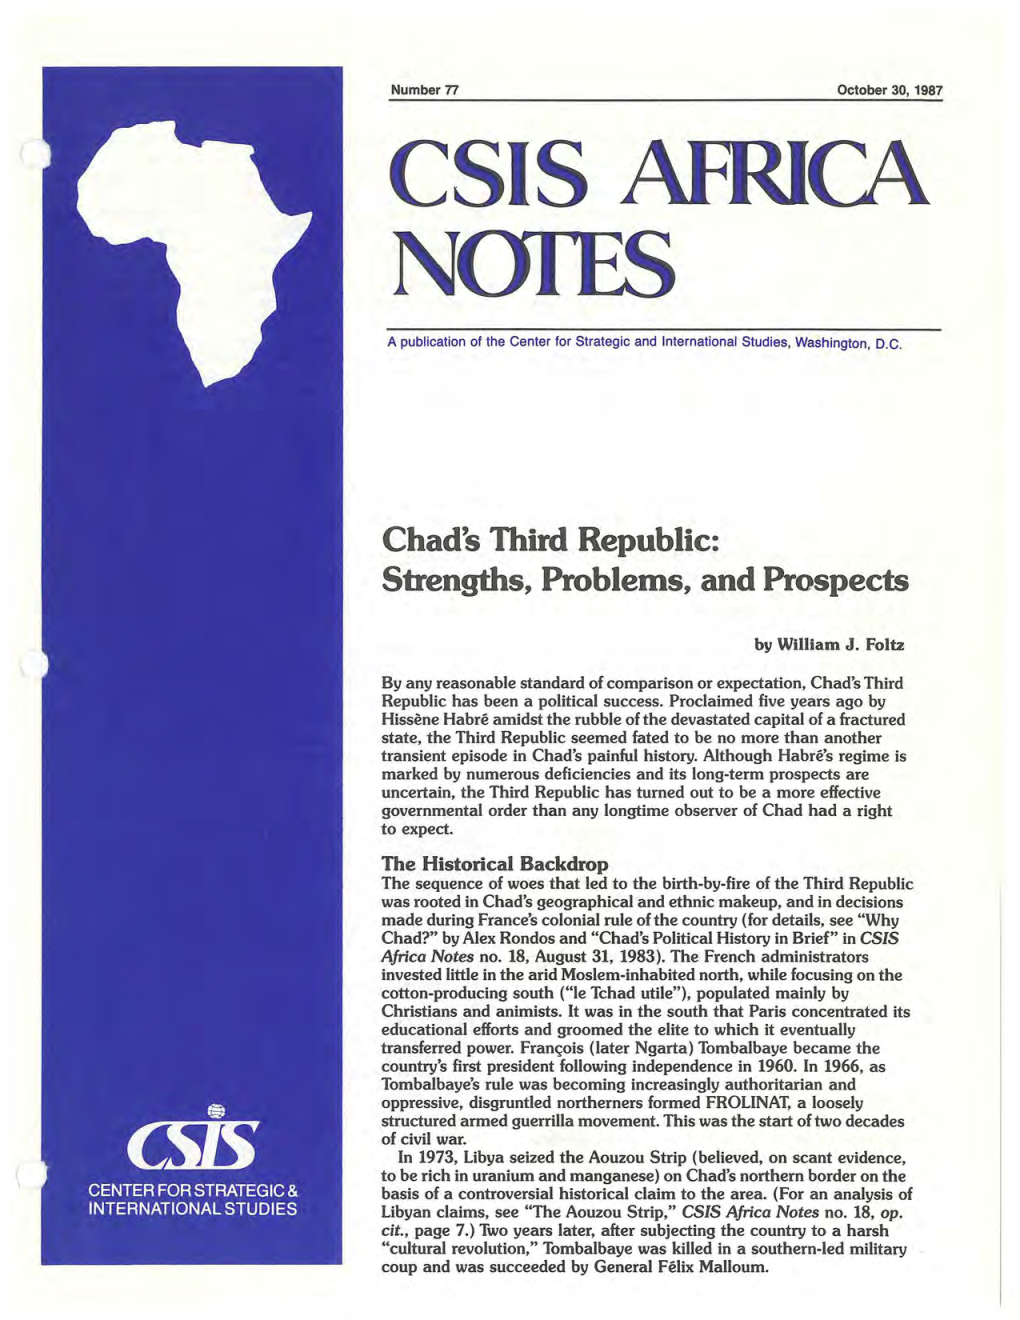 Chad's Third Republic: Strengths, Problems, and Prospects